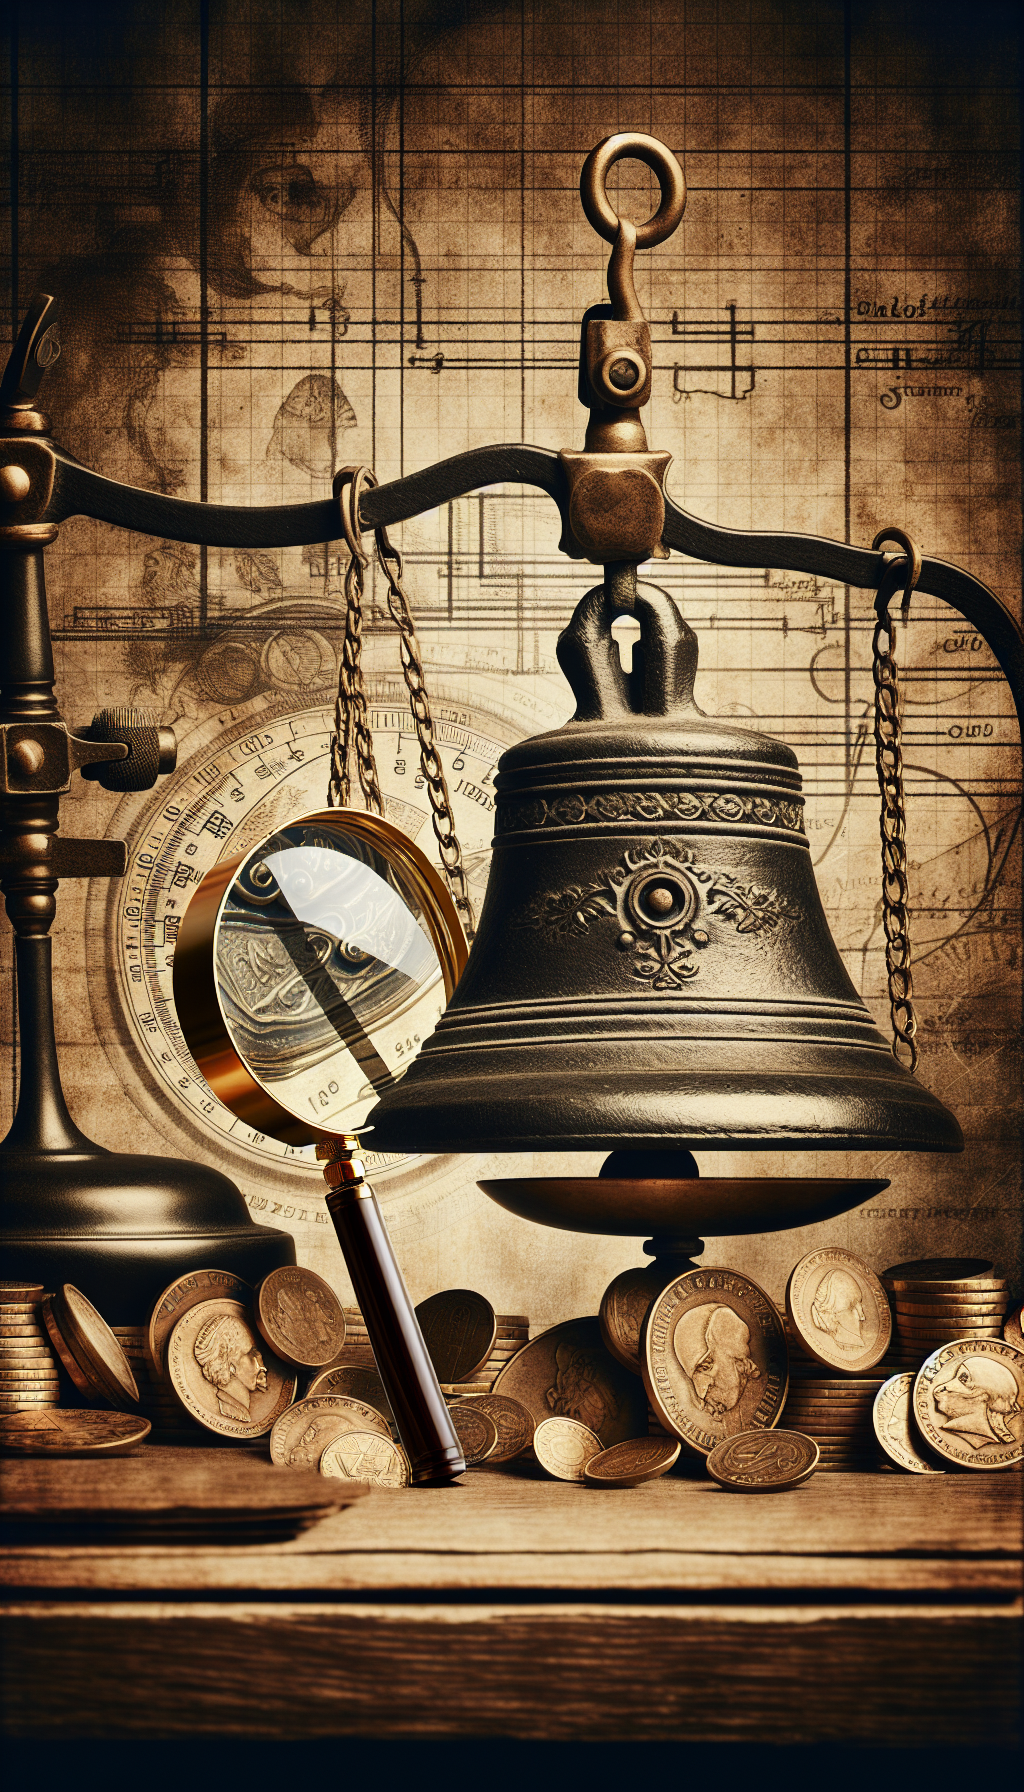 A sepia-toned sketch features a detective magnifying glass scrutinizing the intricate clapper and yoke patterns on a cast iron bell. The bell hangs from an old-fashioned scale that balances with gold coins, suggesting its value, while faded inscriptions hint at historical origin. In the background, a timeline fades into historical landmarks indicative of the bell's age.

16:9